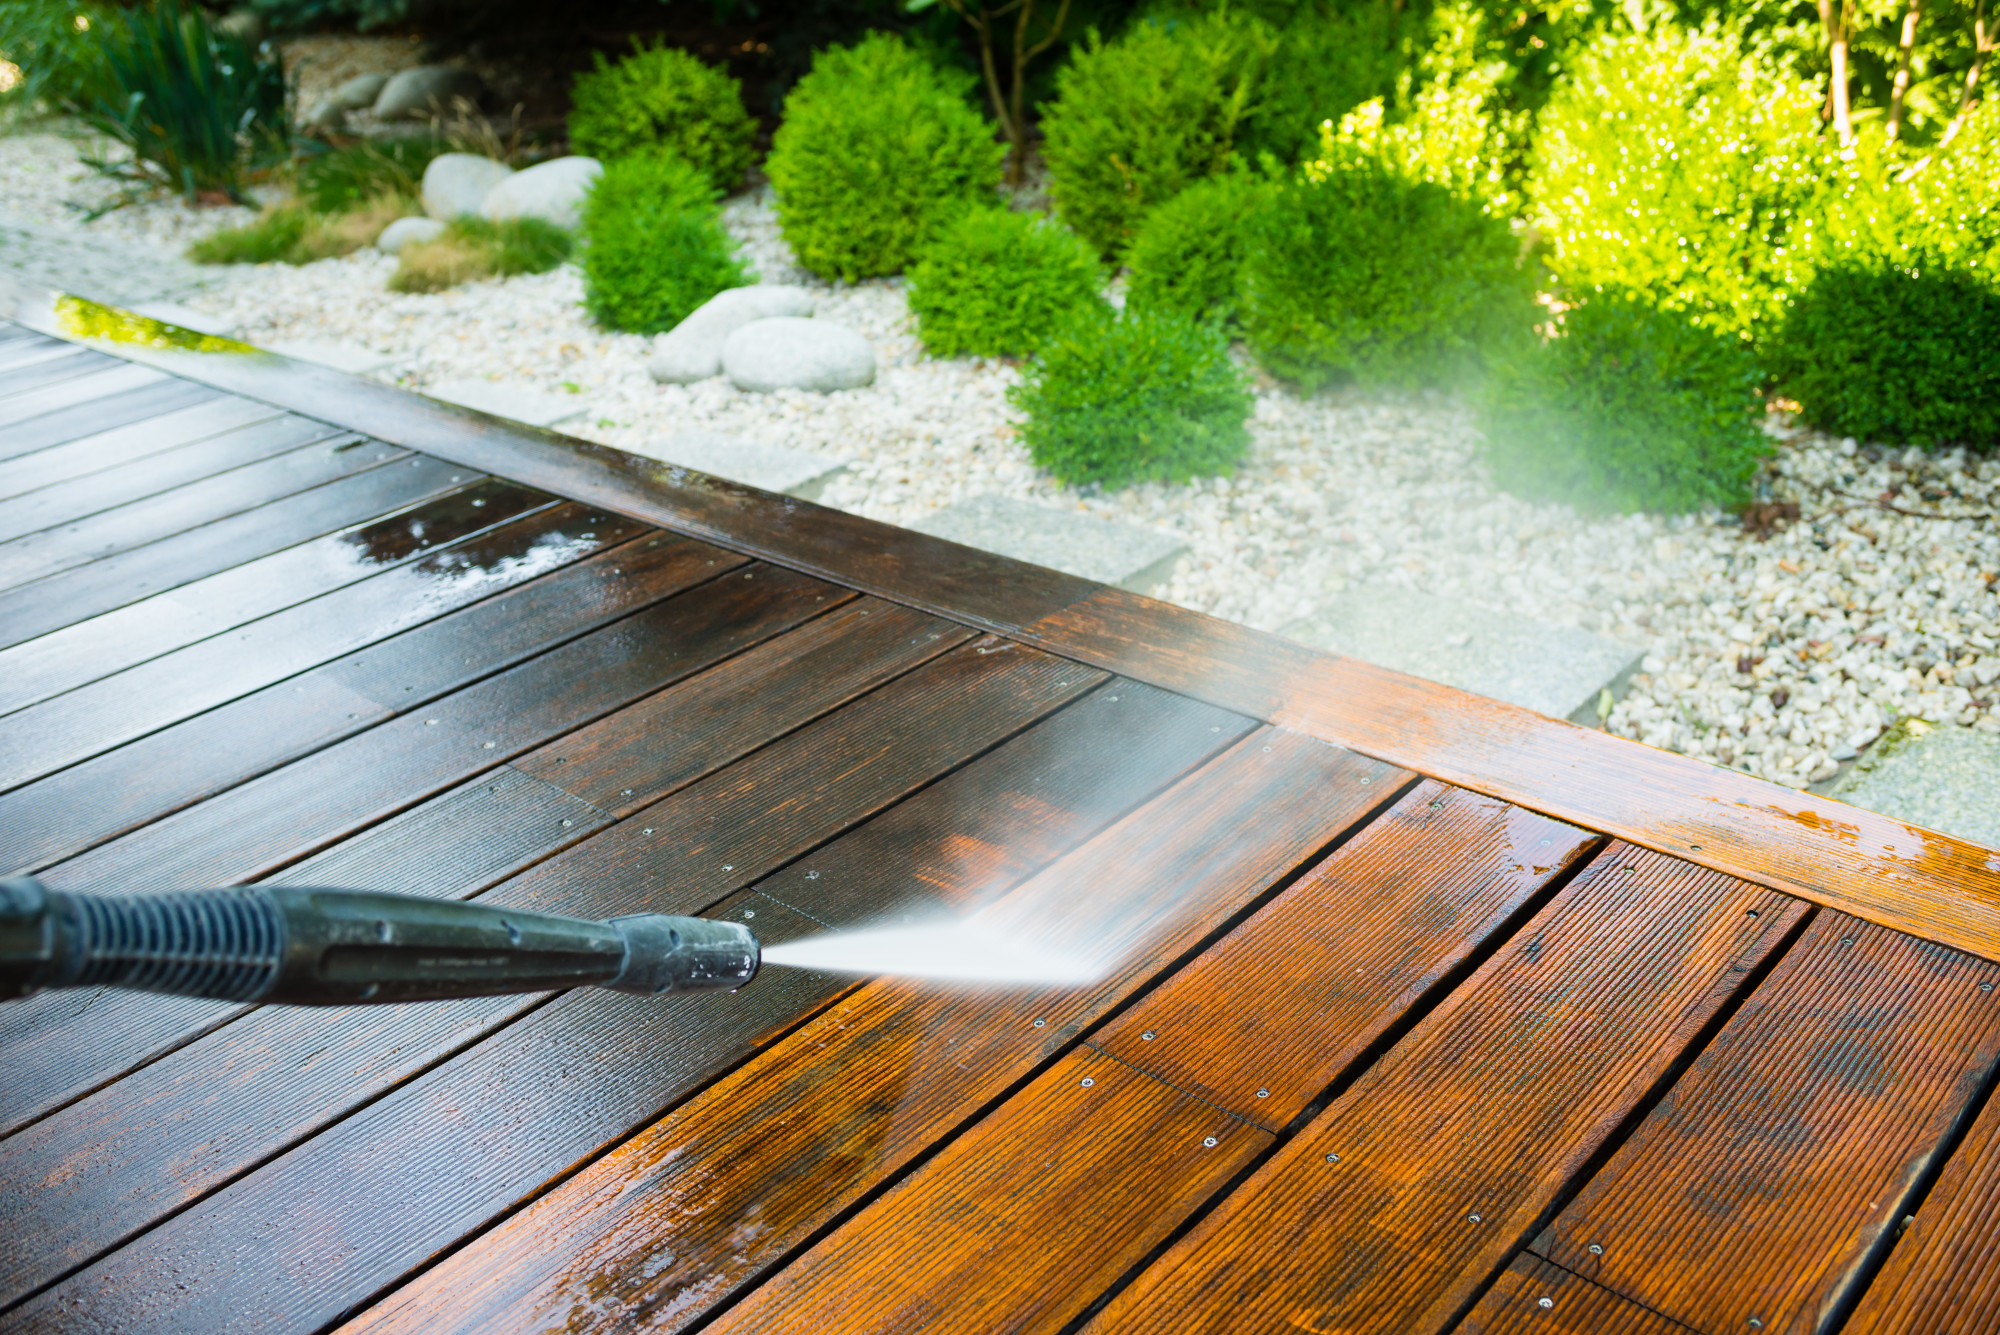 power washing the deck